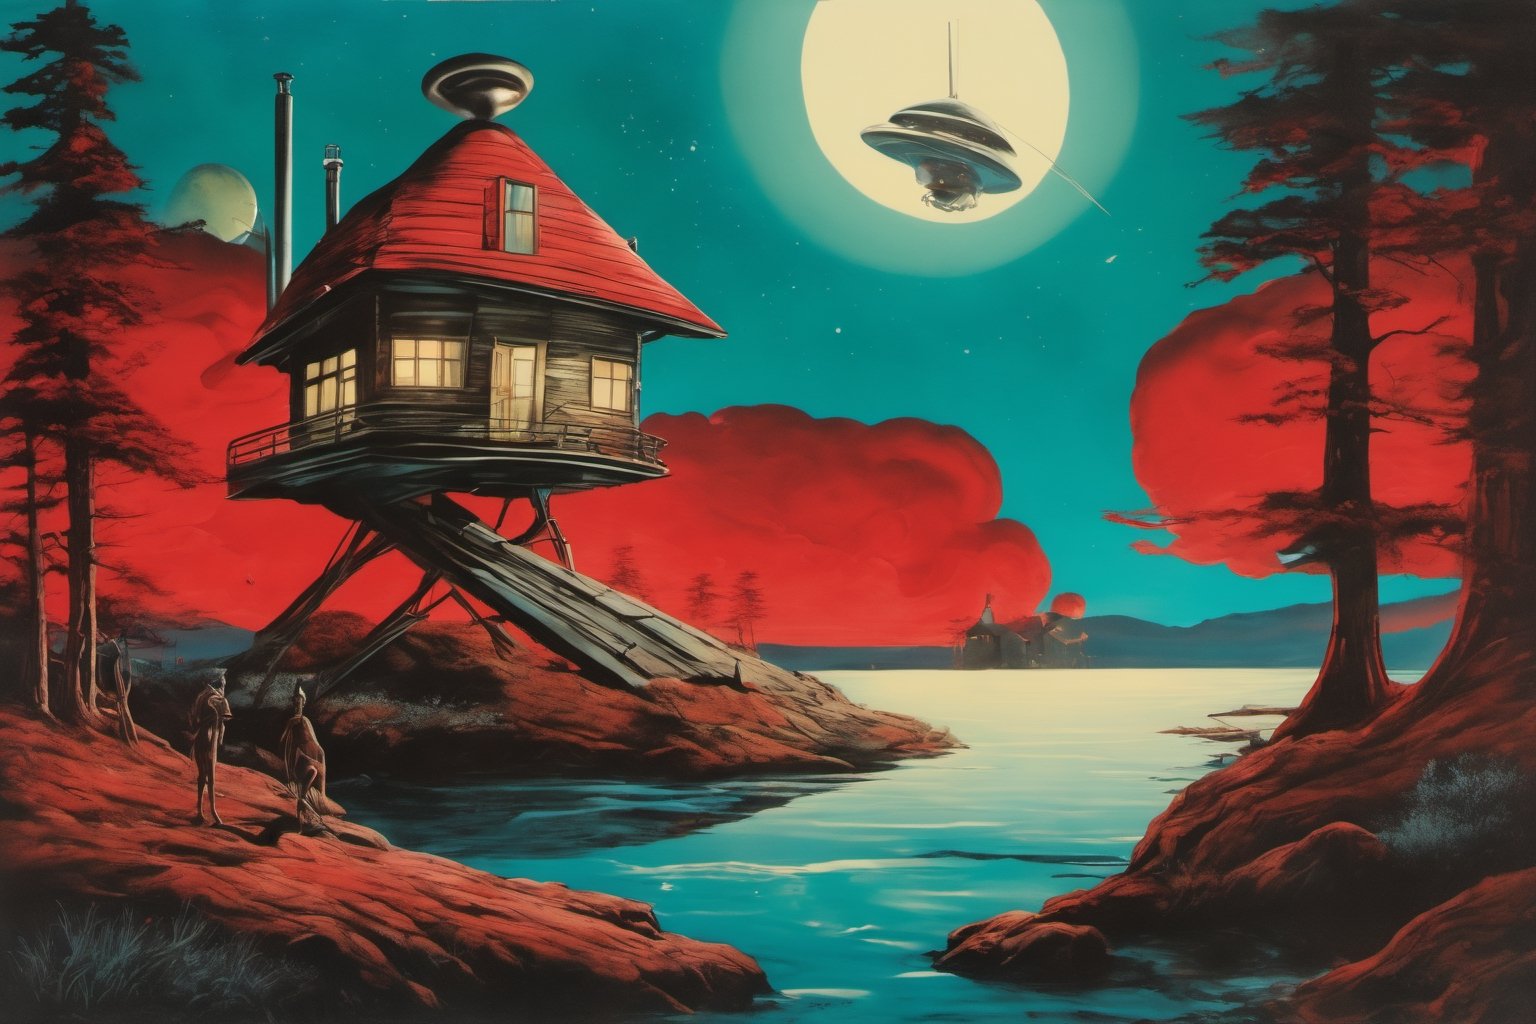 Sketch in liquid metallic ink of a peaceful scene of several aliens surrounding a cabin in the woods. The aliens have different colors and are tall. In the background,

a red lighthouse stands out from the rest of the landscape. The image creates a feeling of tranquility and harmony,

((creation of SALVADOR DALI)),

Masterpiece of surrealism, creation of great pictorial beauty,in the style of LeCinematique